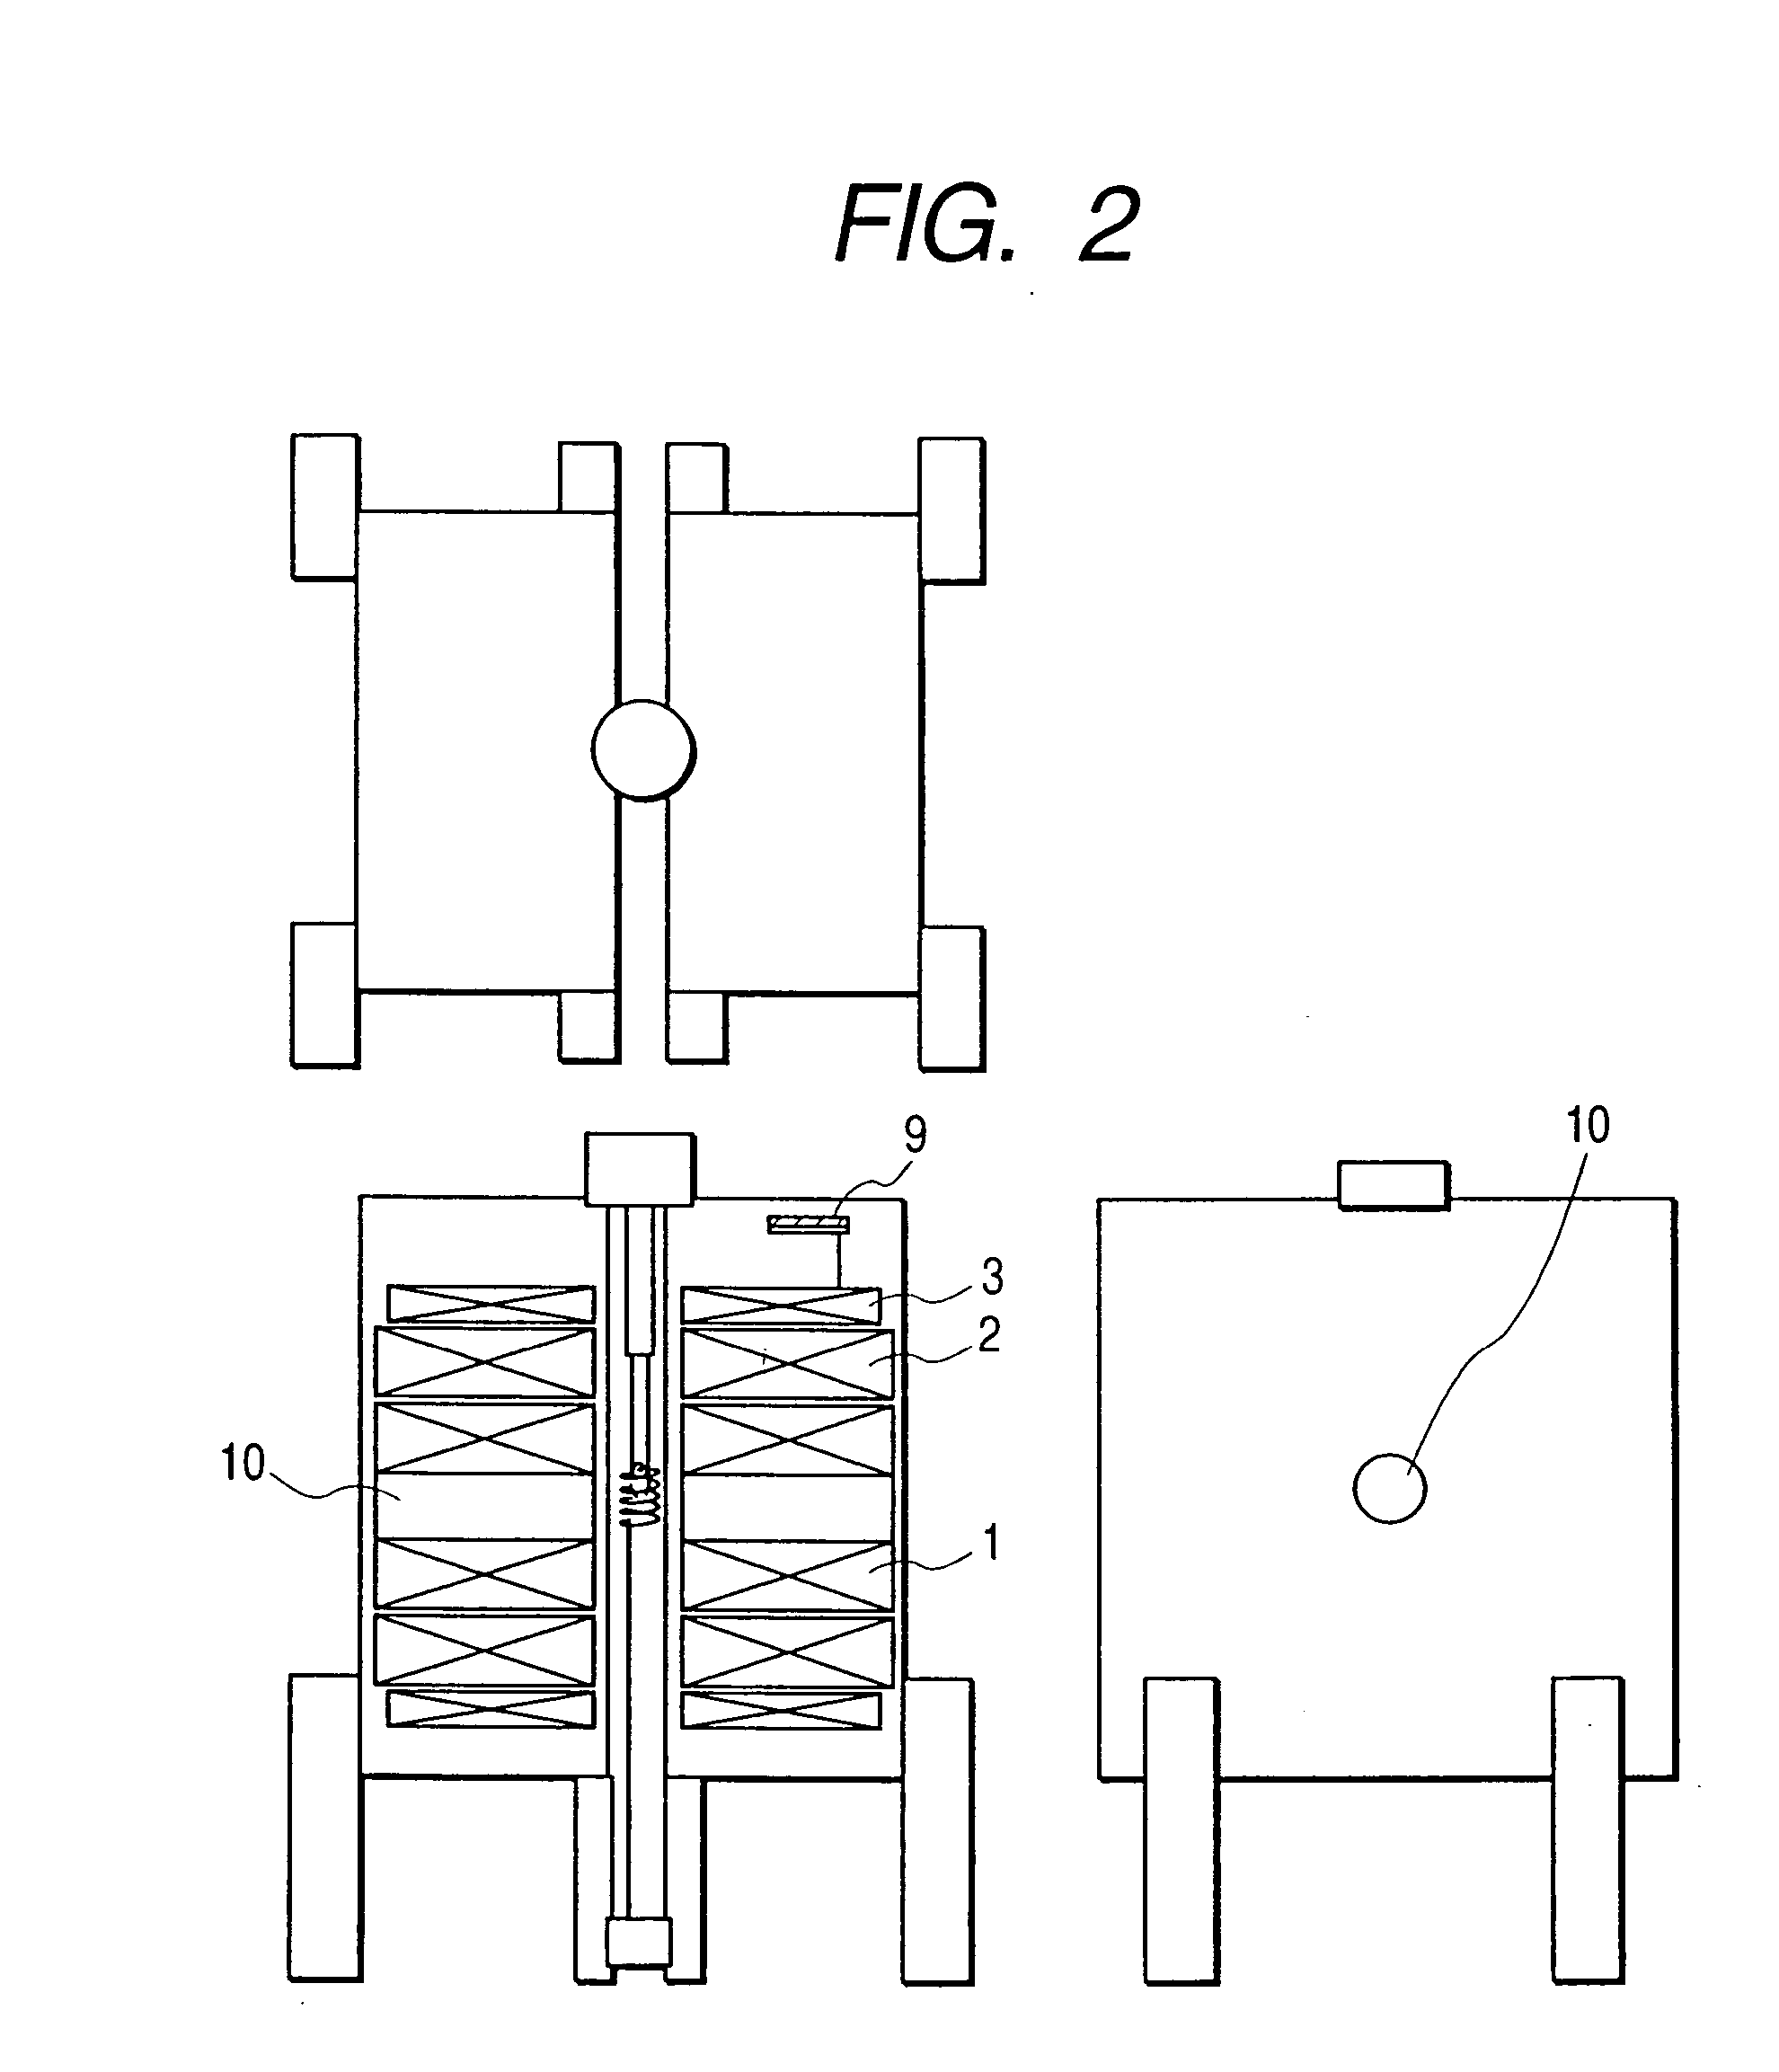 Supersensitive nuclear magnetic resonance imaging apparatus